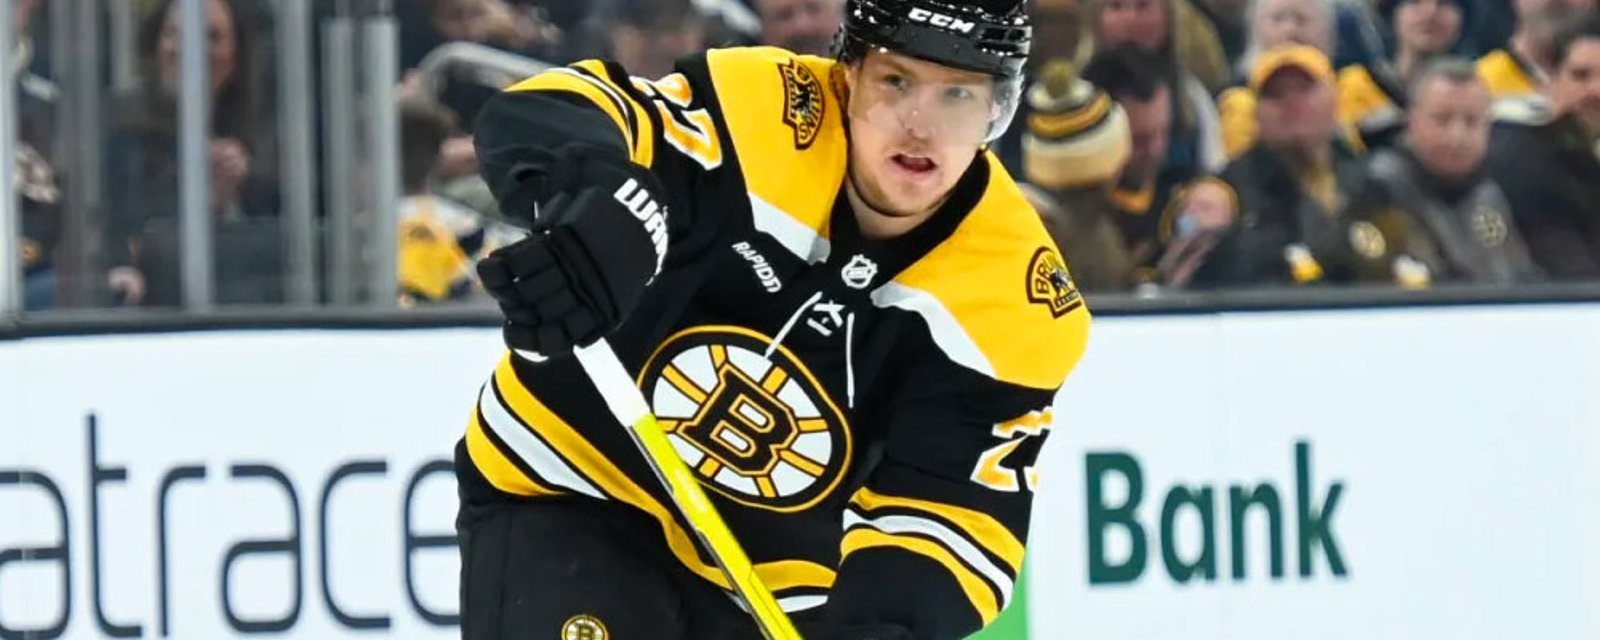 Bruins' Lindholm makes an admission and Bruins fans are not happy